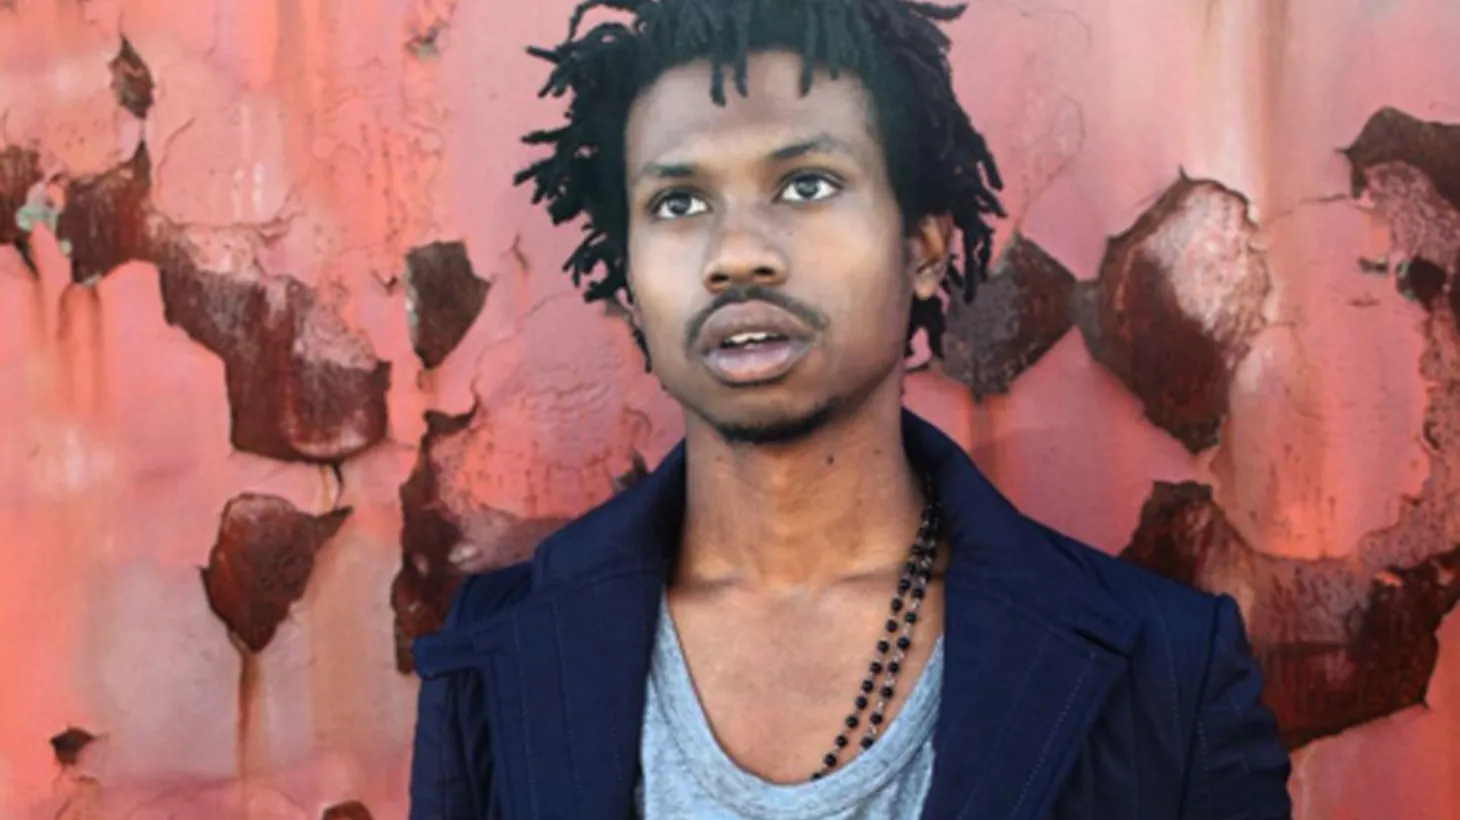 Atlanta musician Raury is only 19 years old and is already being described as a visionary. His sound seamlessly melds hip hop, rock and folk, while his lyrics address serious societal issues, but with compassion, positivity and a call for peace.